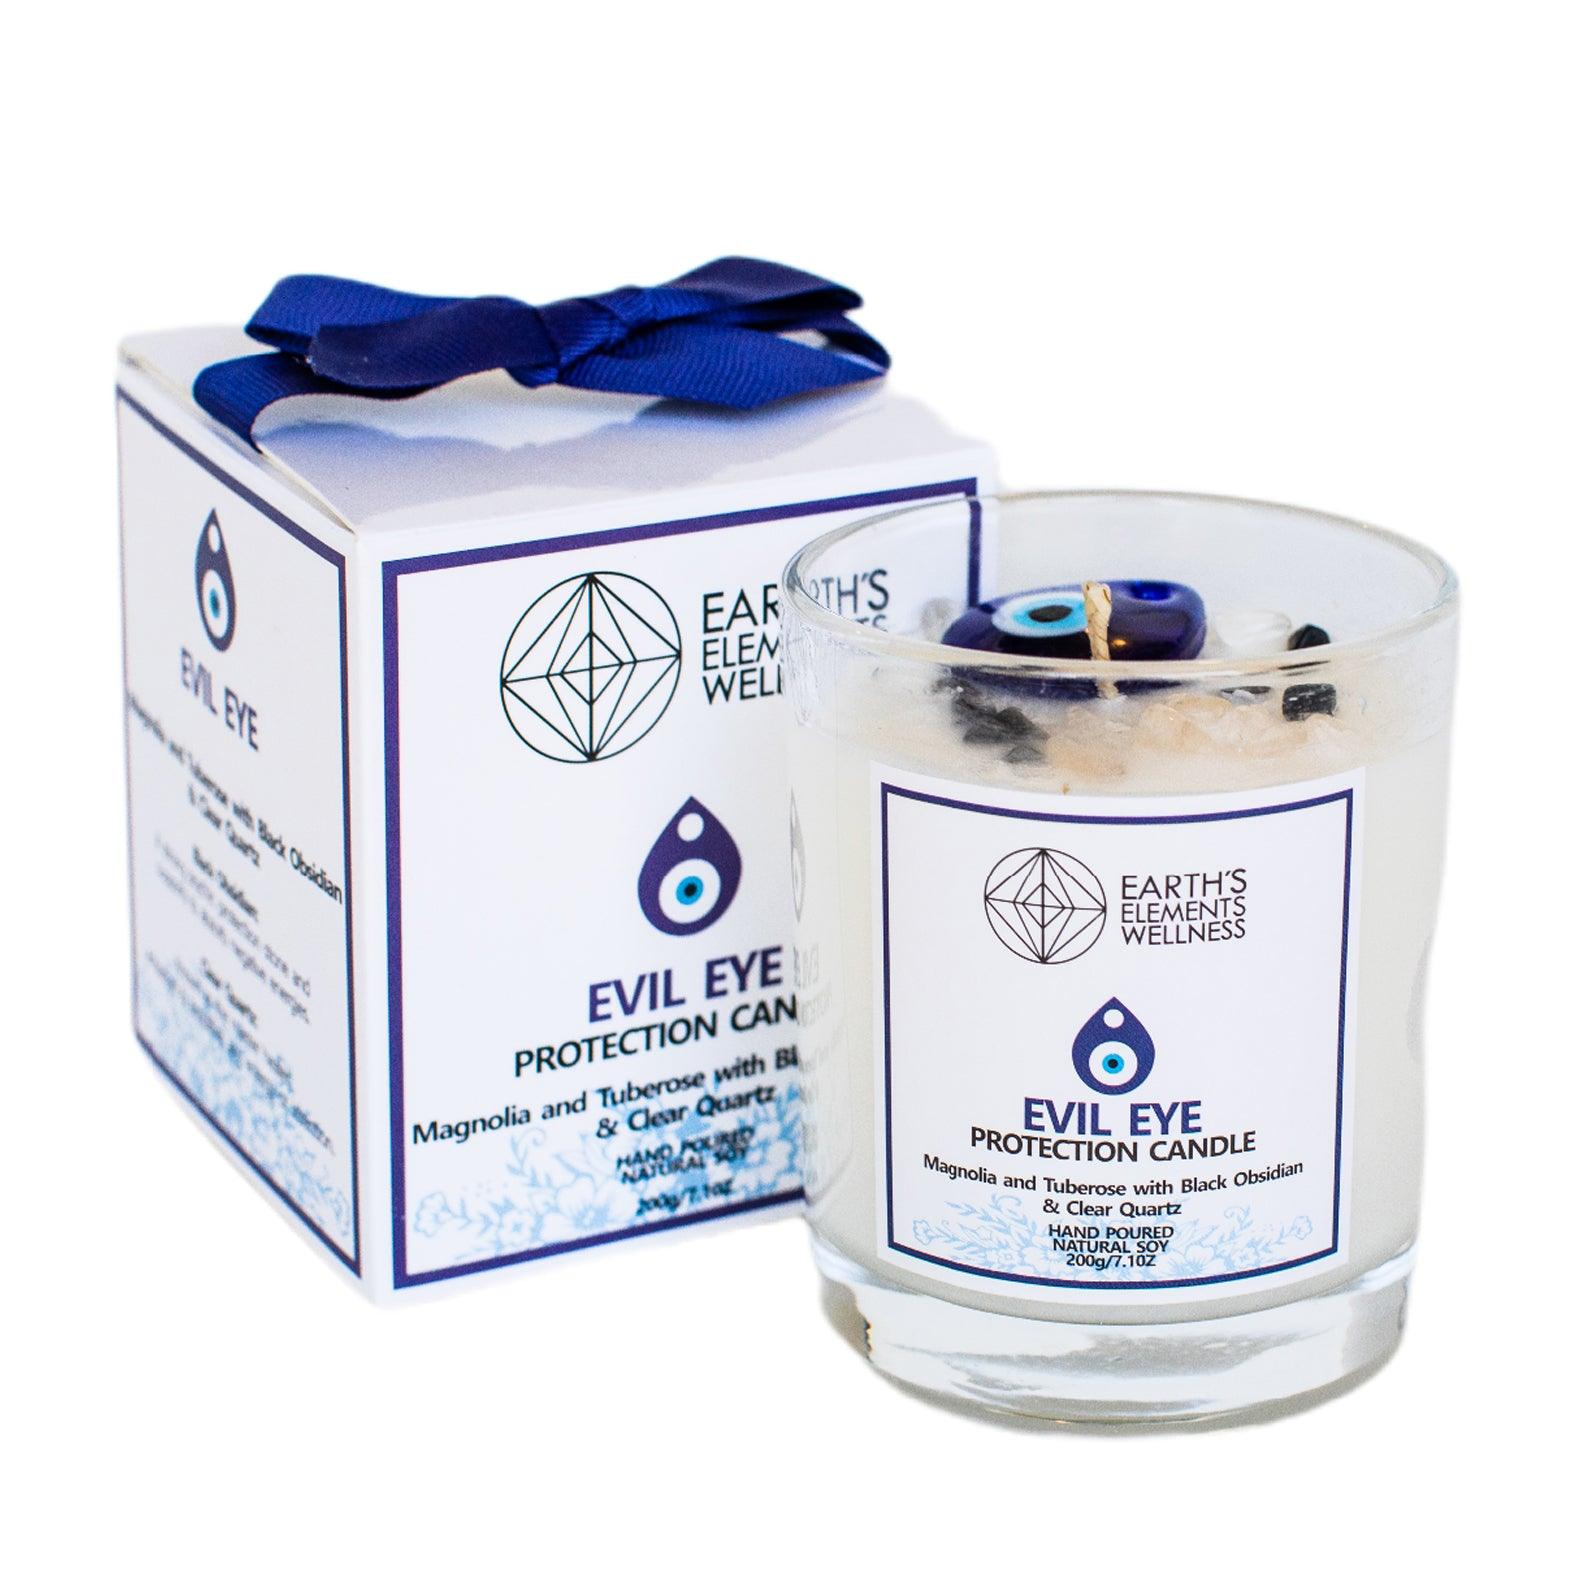 Evil Eye Protection Crystal Candle - Magnolia and Tuberose with Black Obsidian and Clear Quartz - The Rutile Ltd